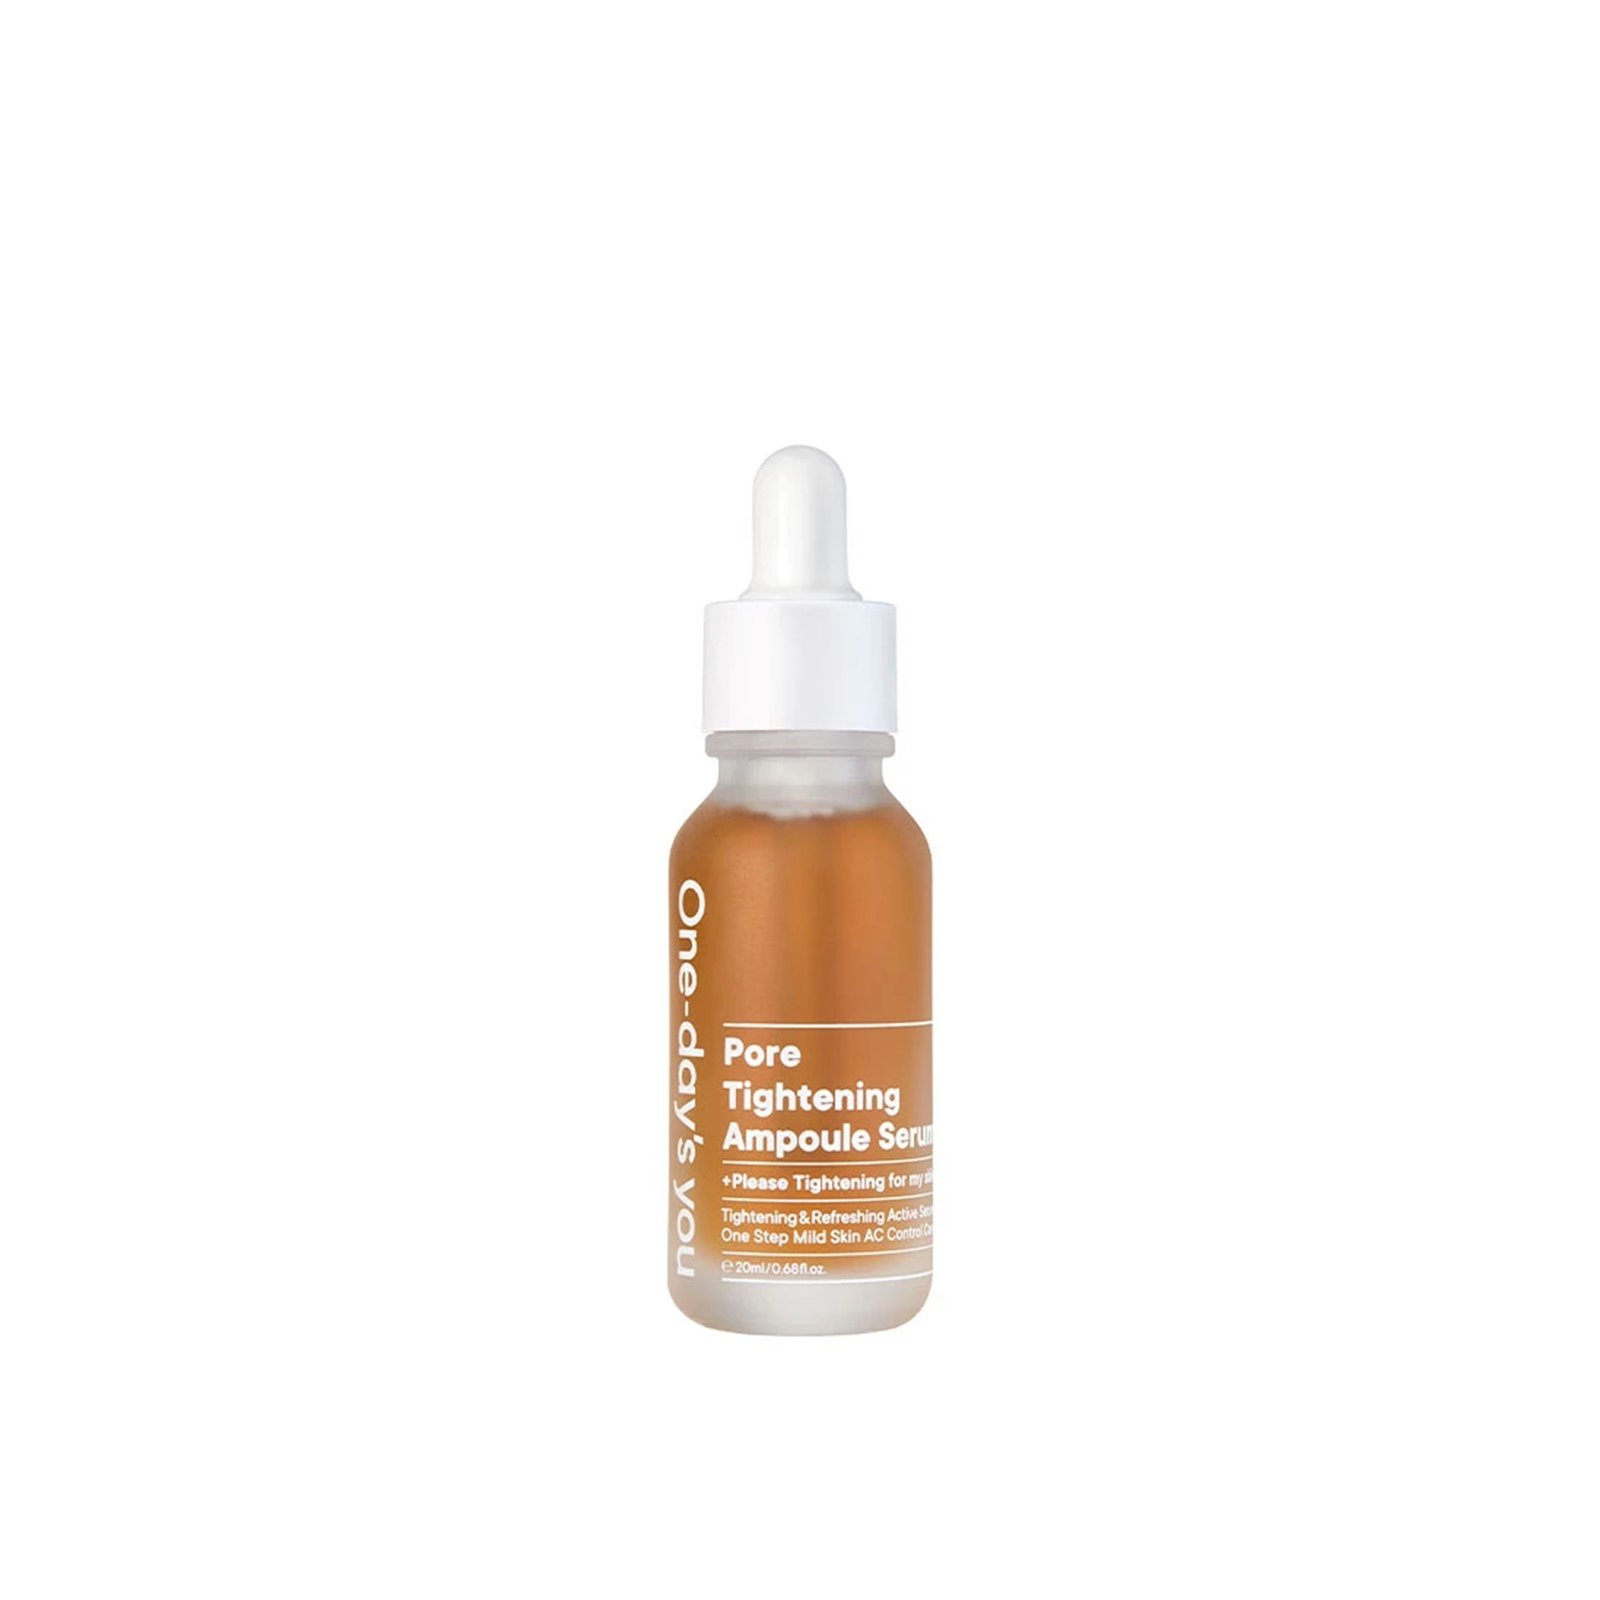 One-day's you Pore Tightening Ampoule Serum 30ml (1.01 fl oz)